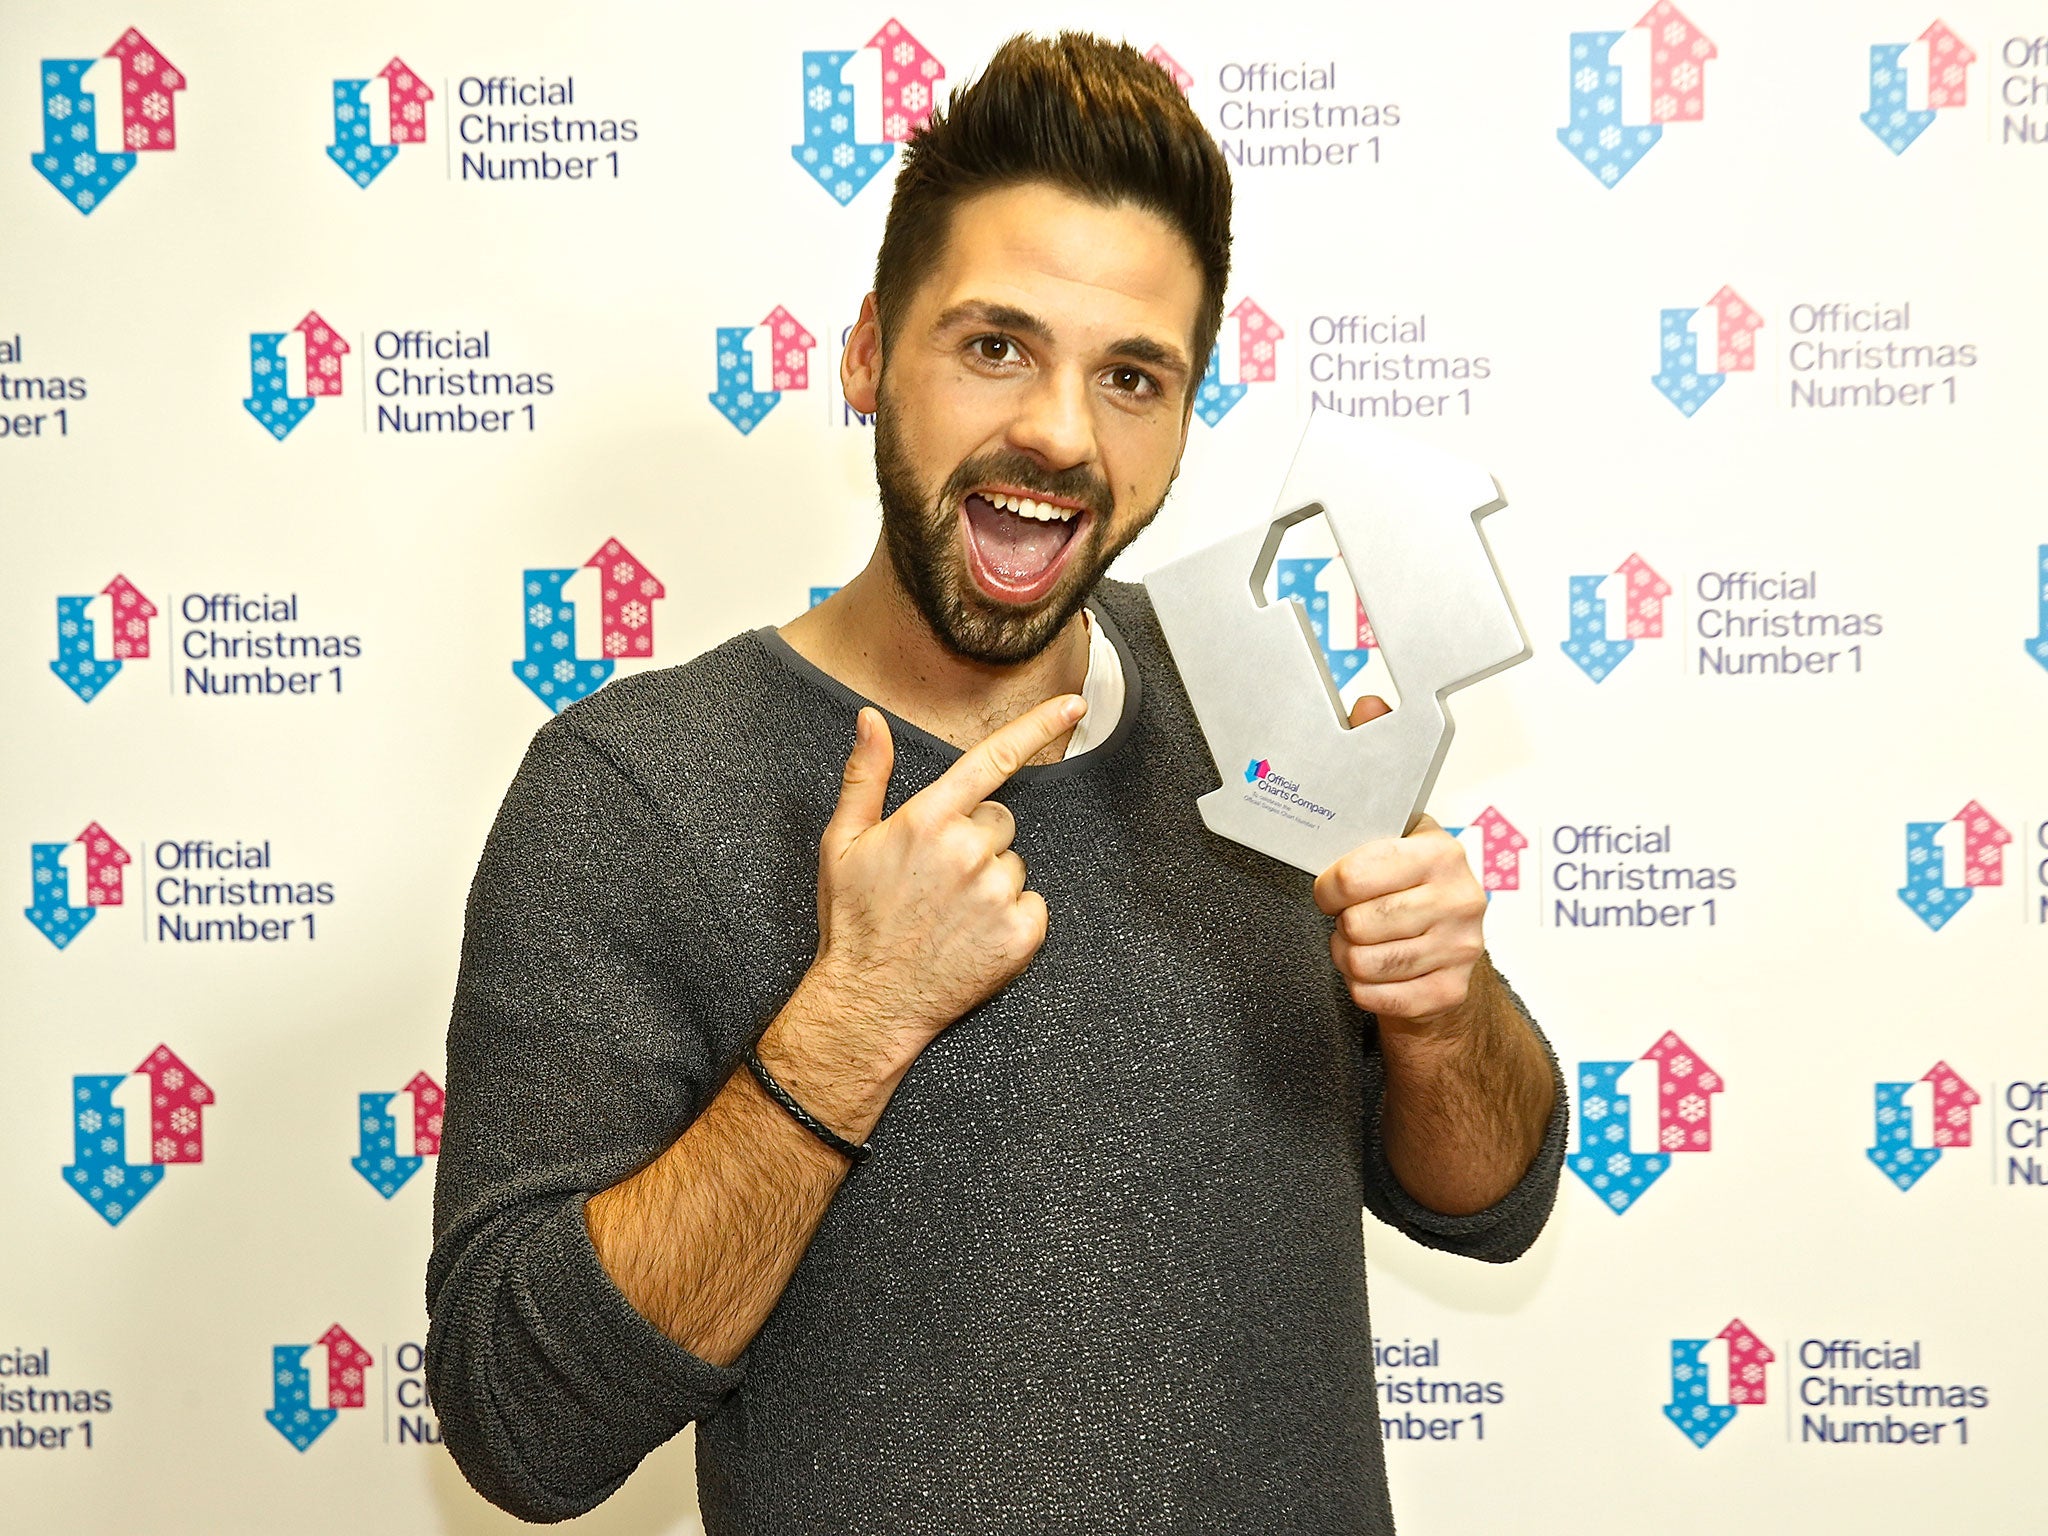 X Factor winner Ben Haenow has scored his first Christmas number one